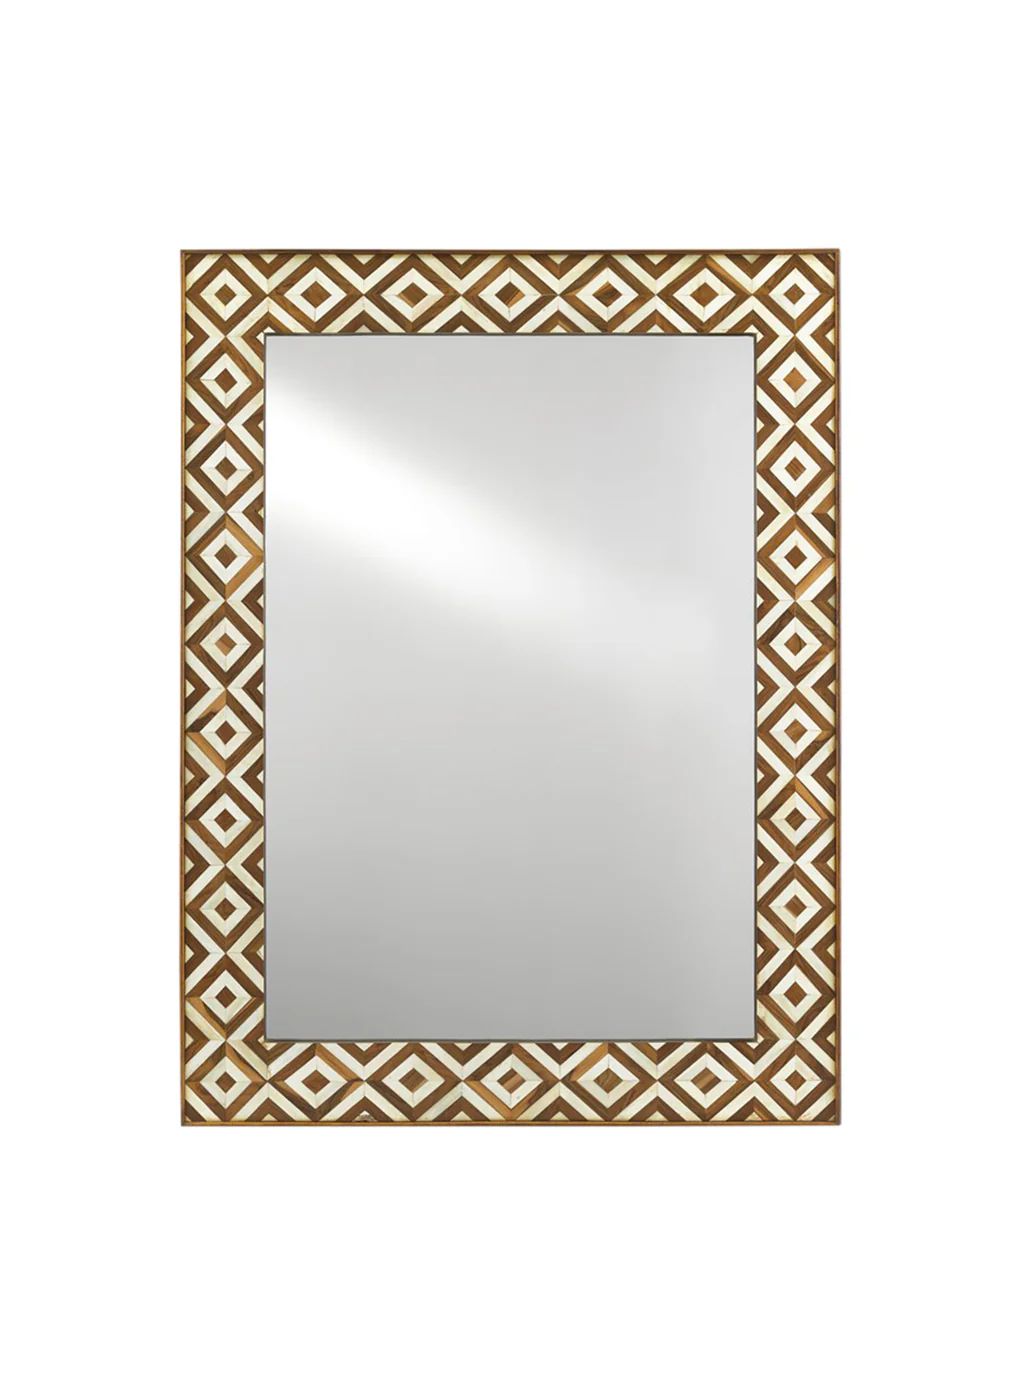 Alfonso Mirror | House of Jade Home